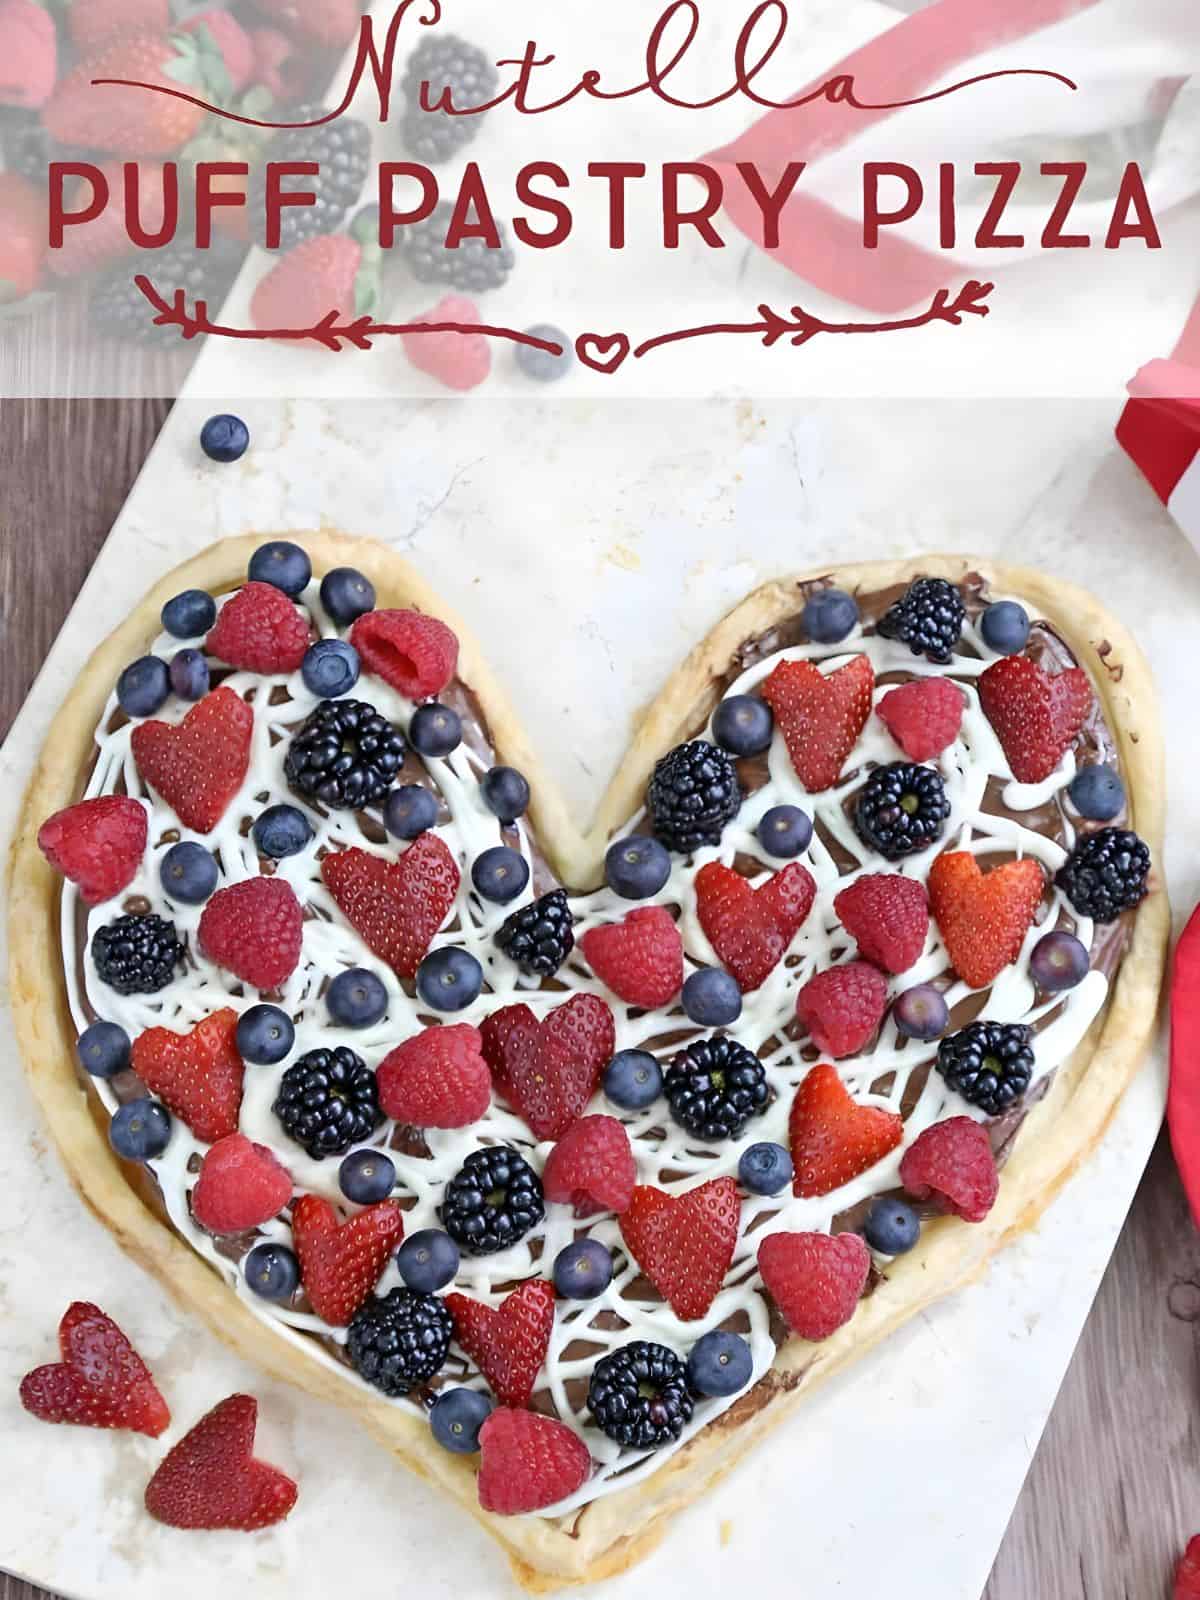 Nutella puff pastry pizza made with buttery puff pastry crust topped with Nutella, melted white chocolate, and fresh berries.